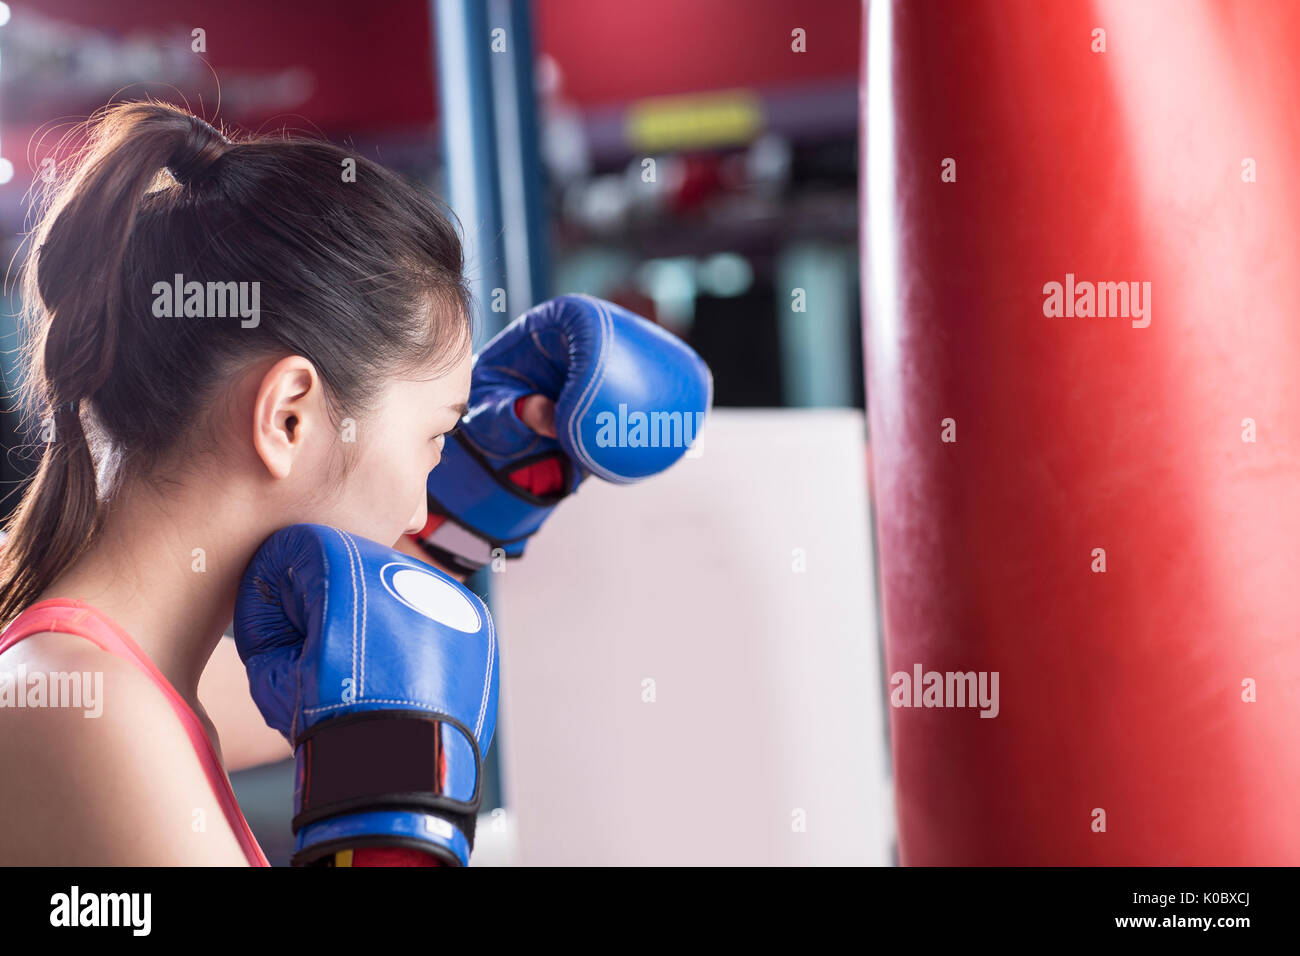 Side view portrait of female boxer Stock Photo